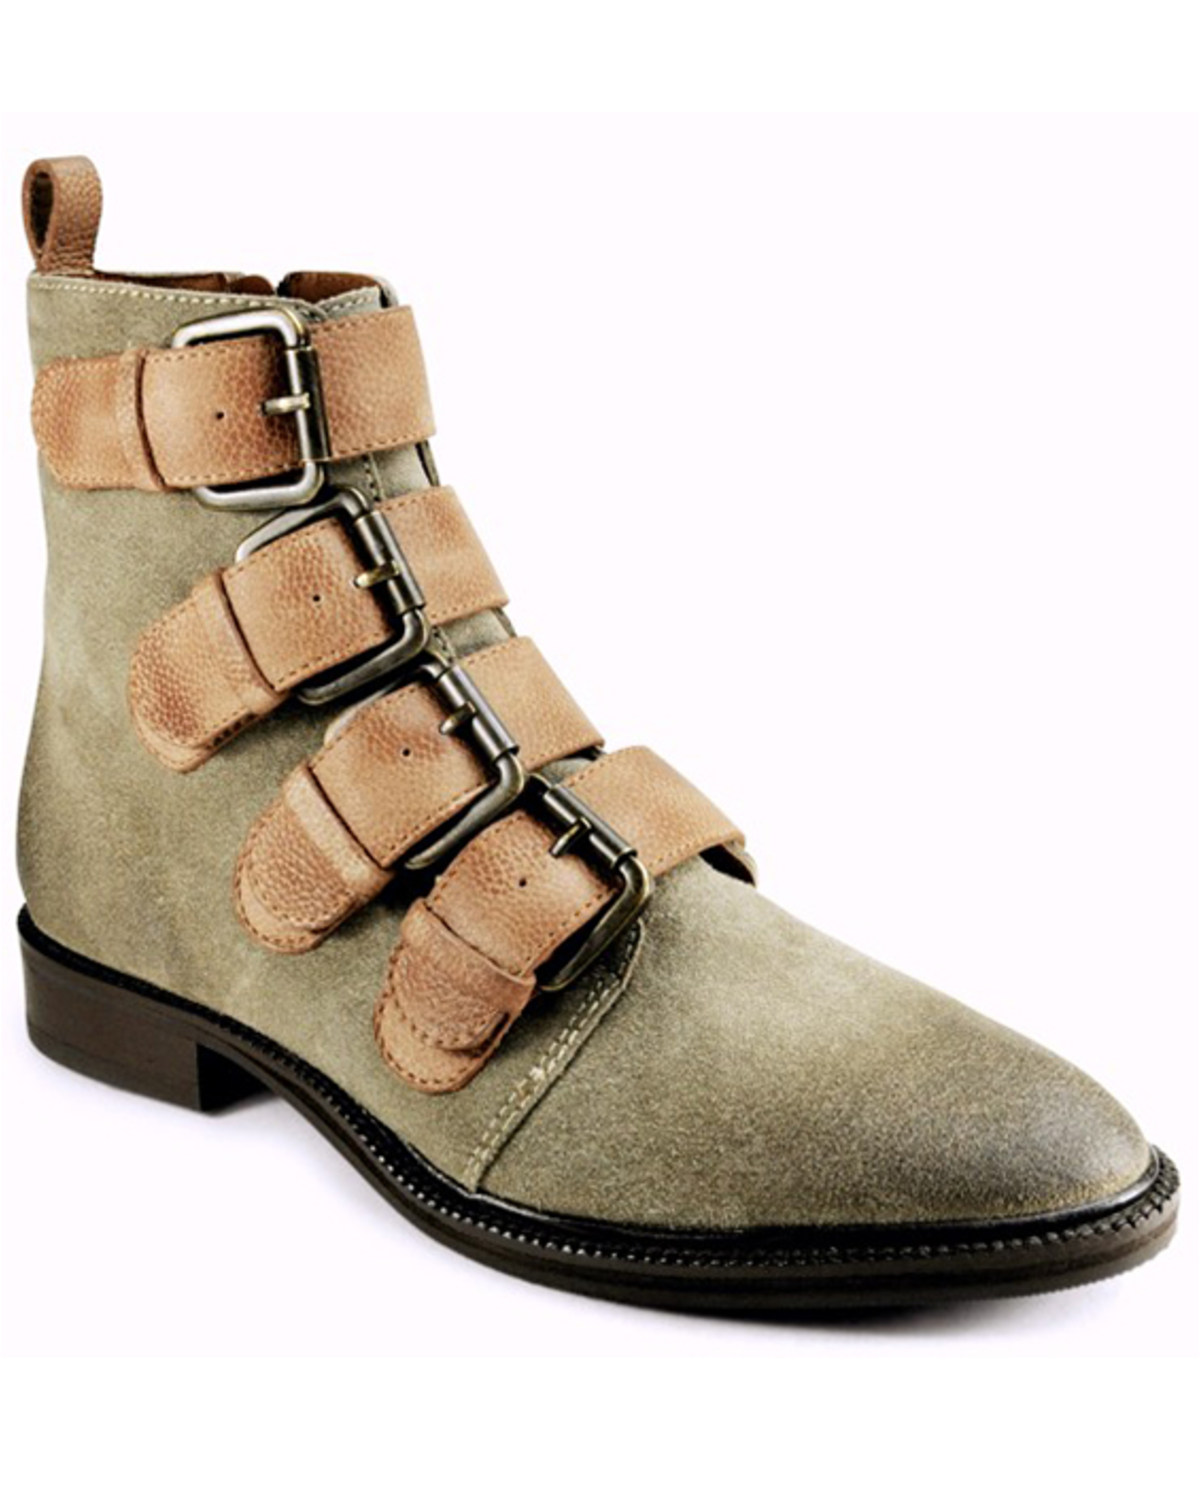 Band of the Free Women's Hawthorne Suede Buckle Boots - Medium Toe